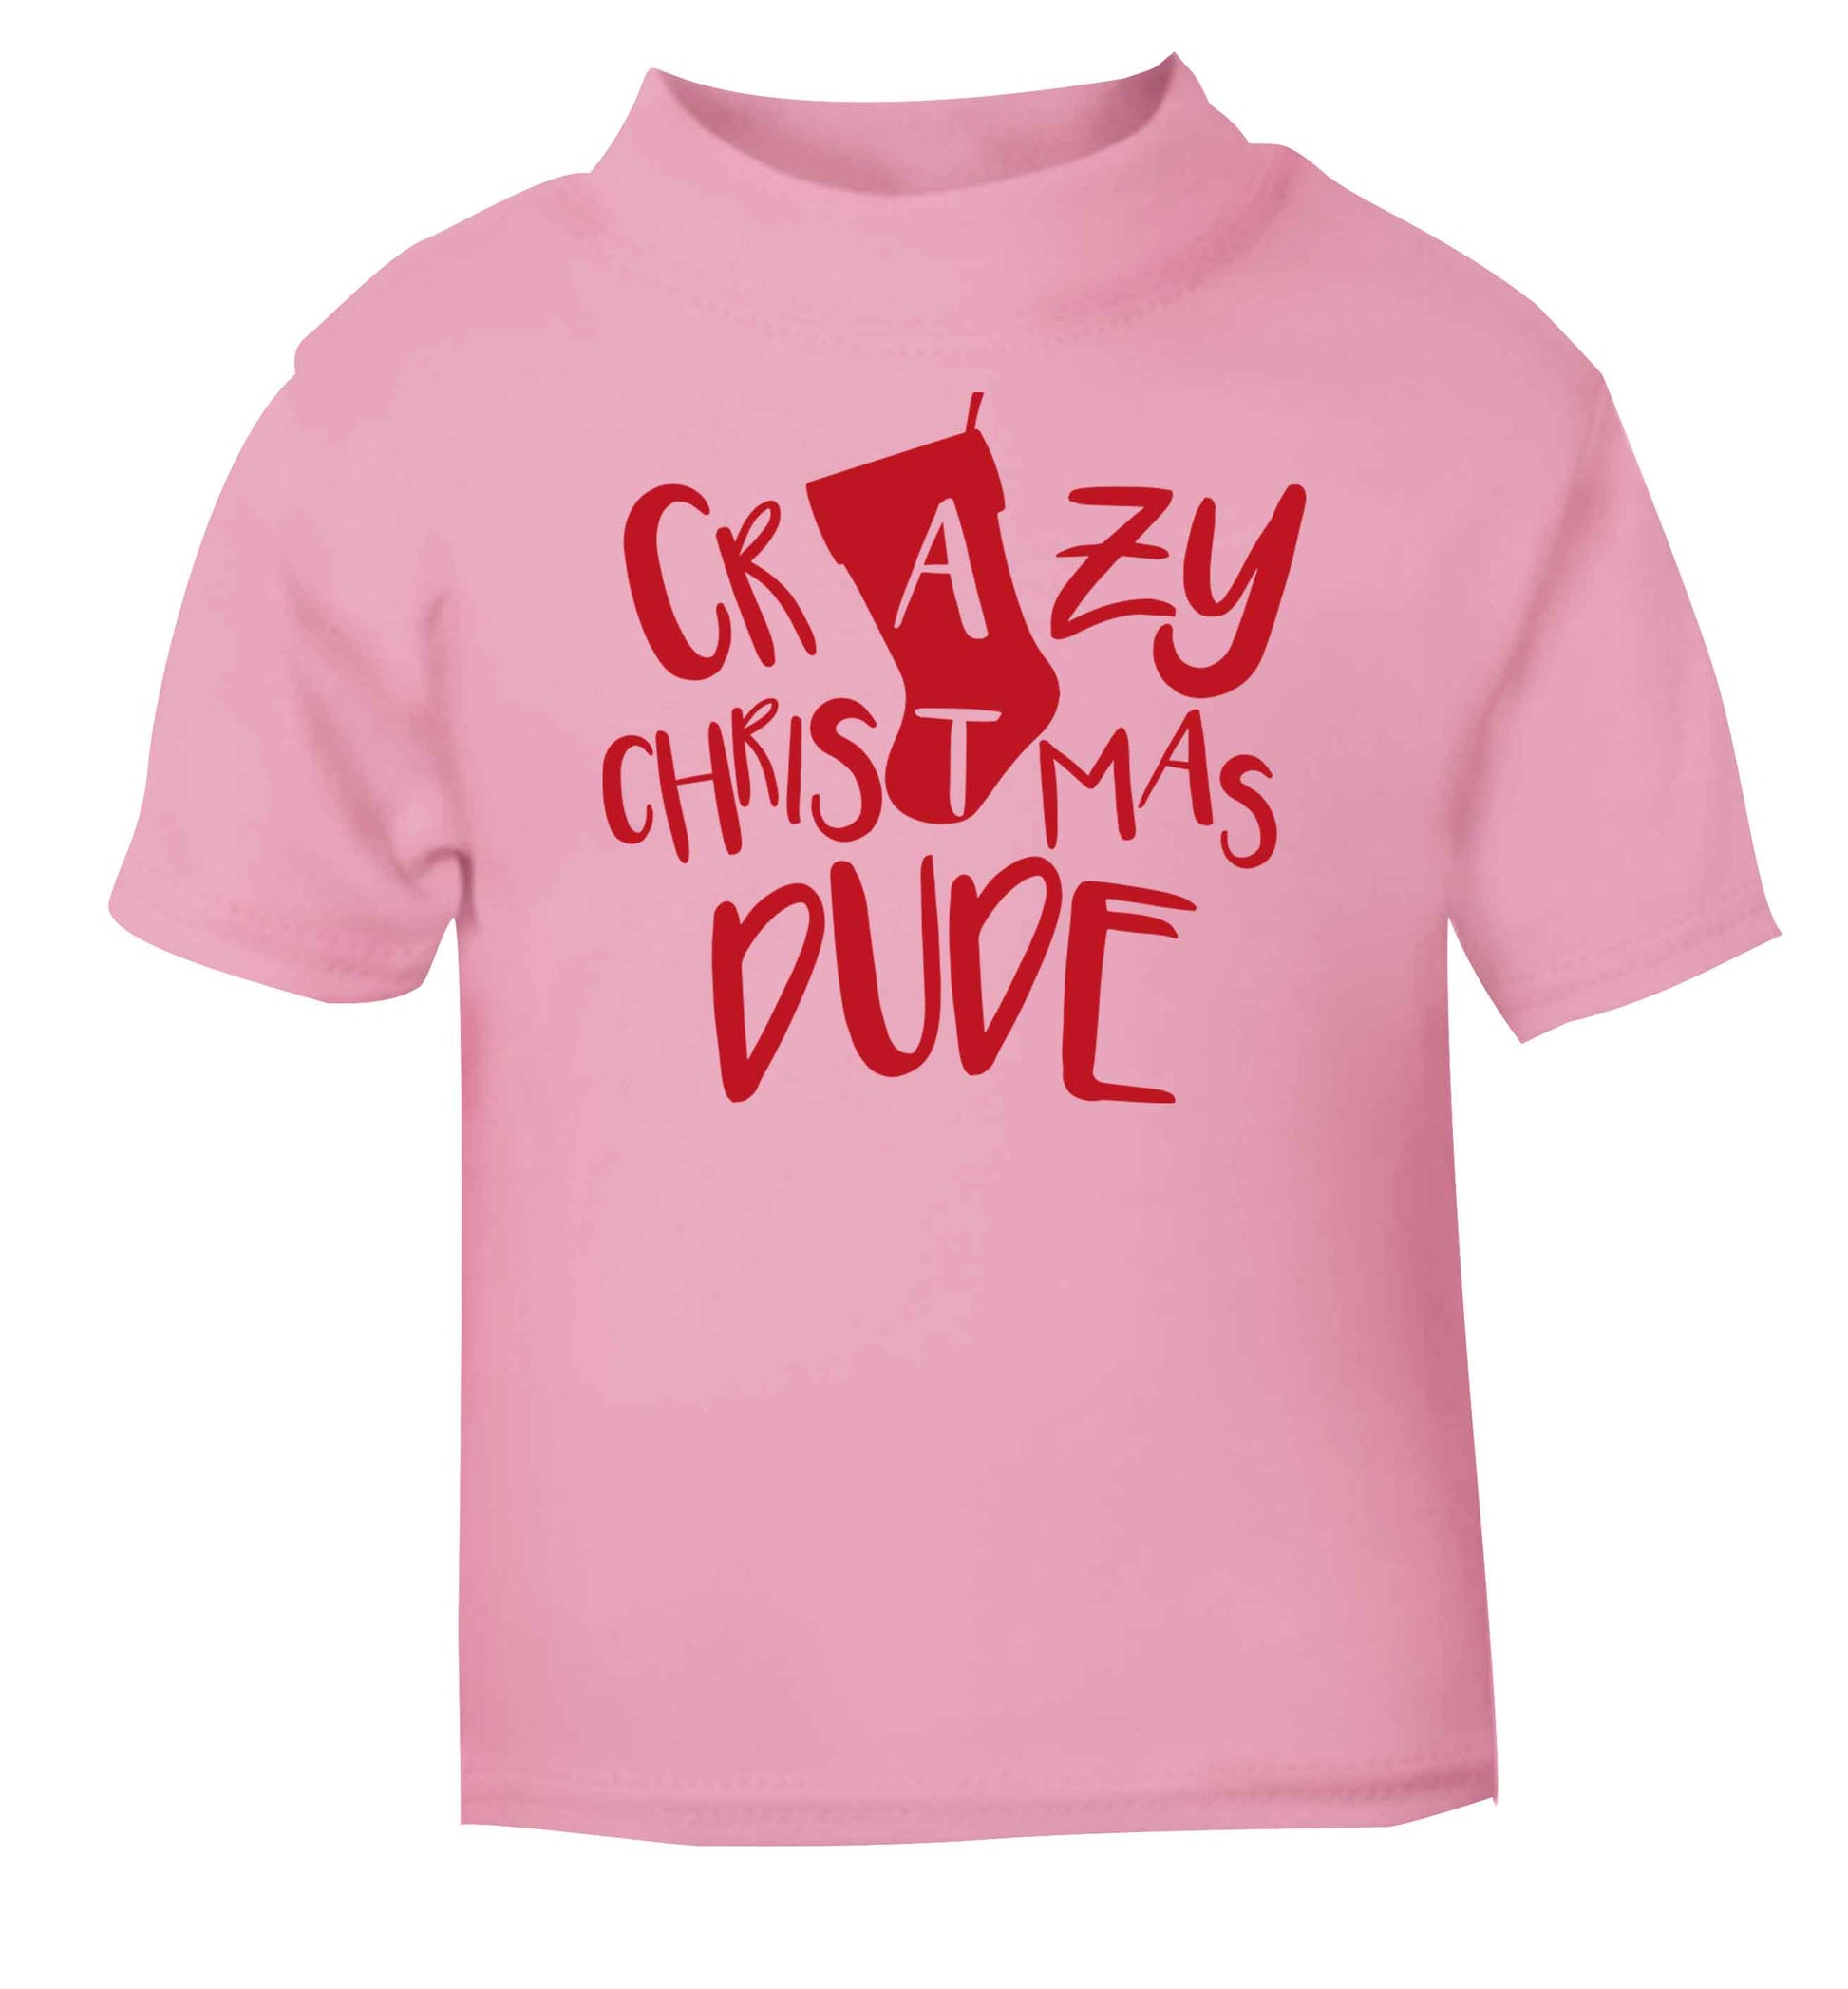 Crazy Christmas Dude light pink baby toddler Tshirt 2 Years